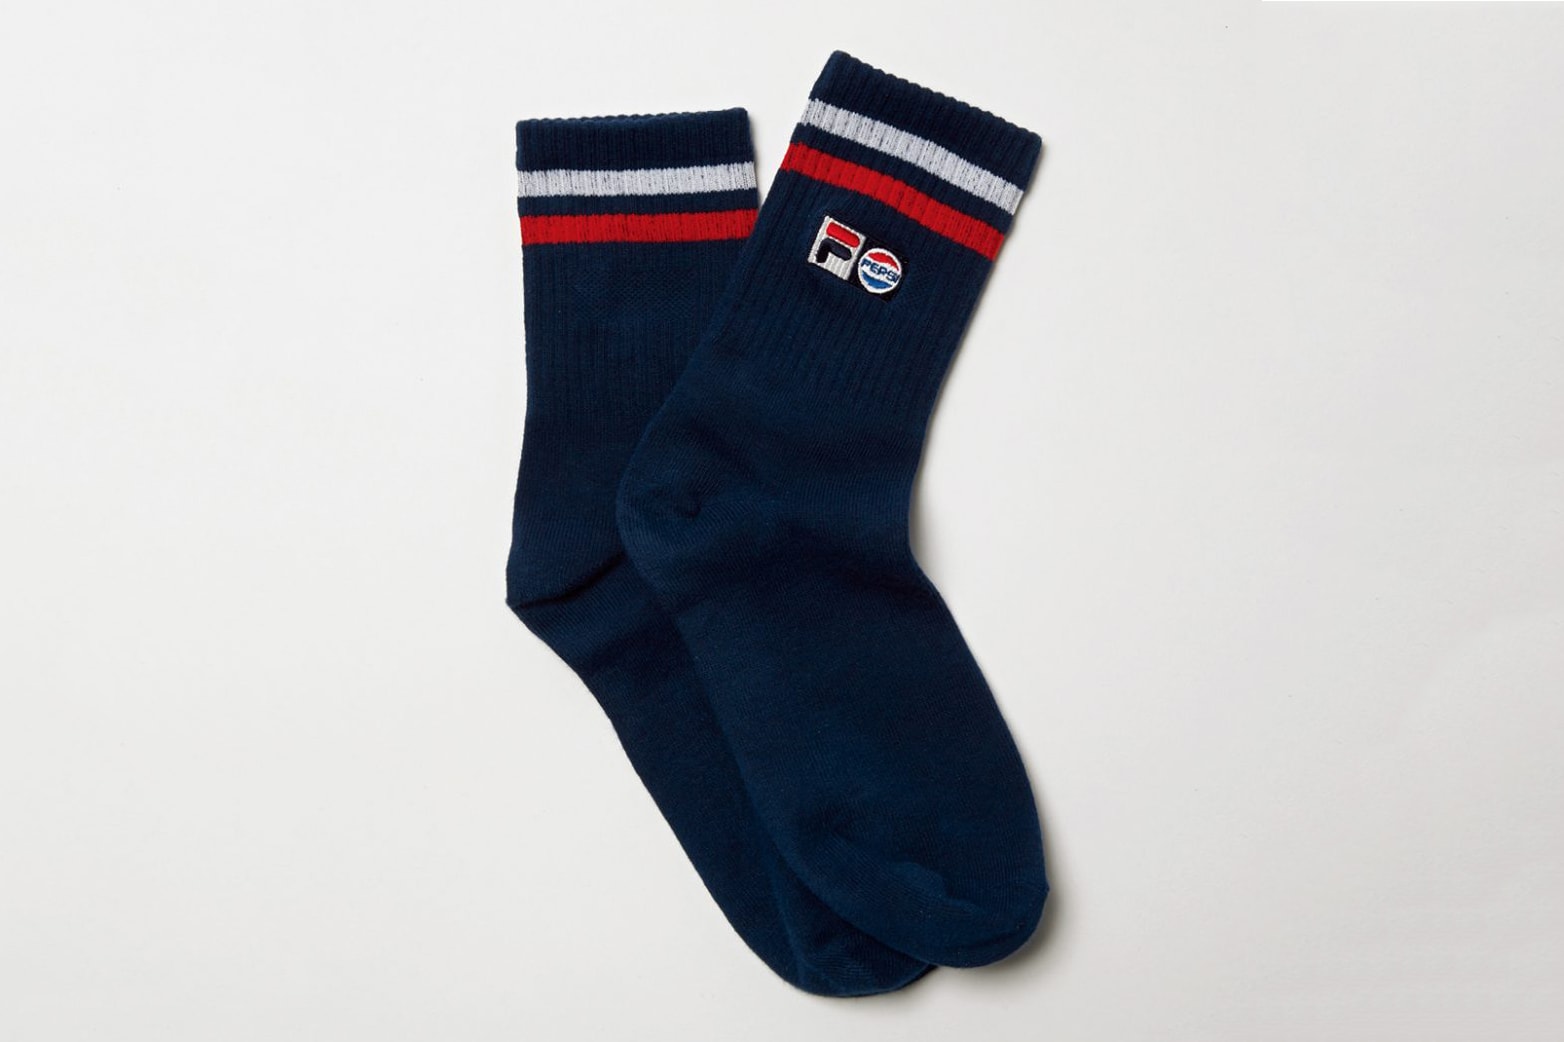 FILA and Pepsi Launch Capsule Collection